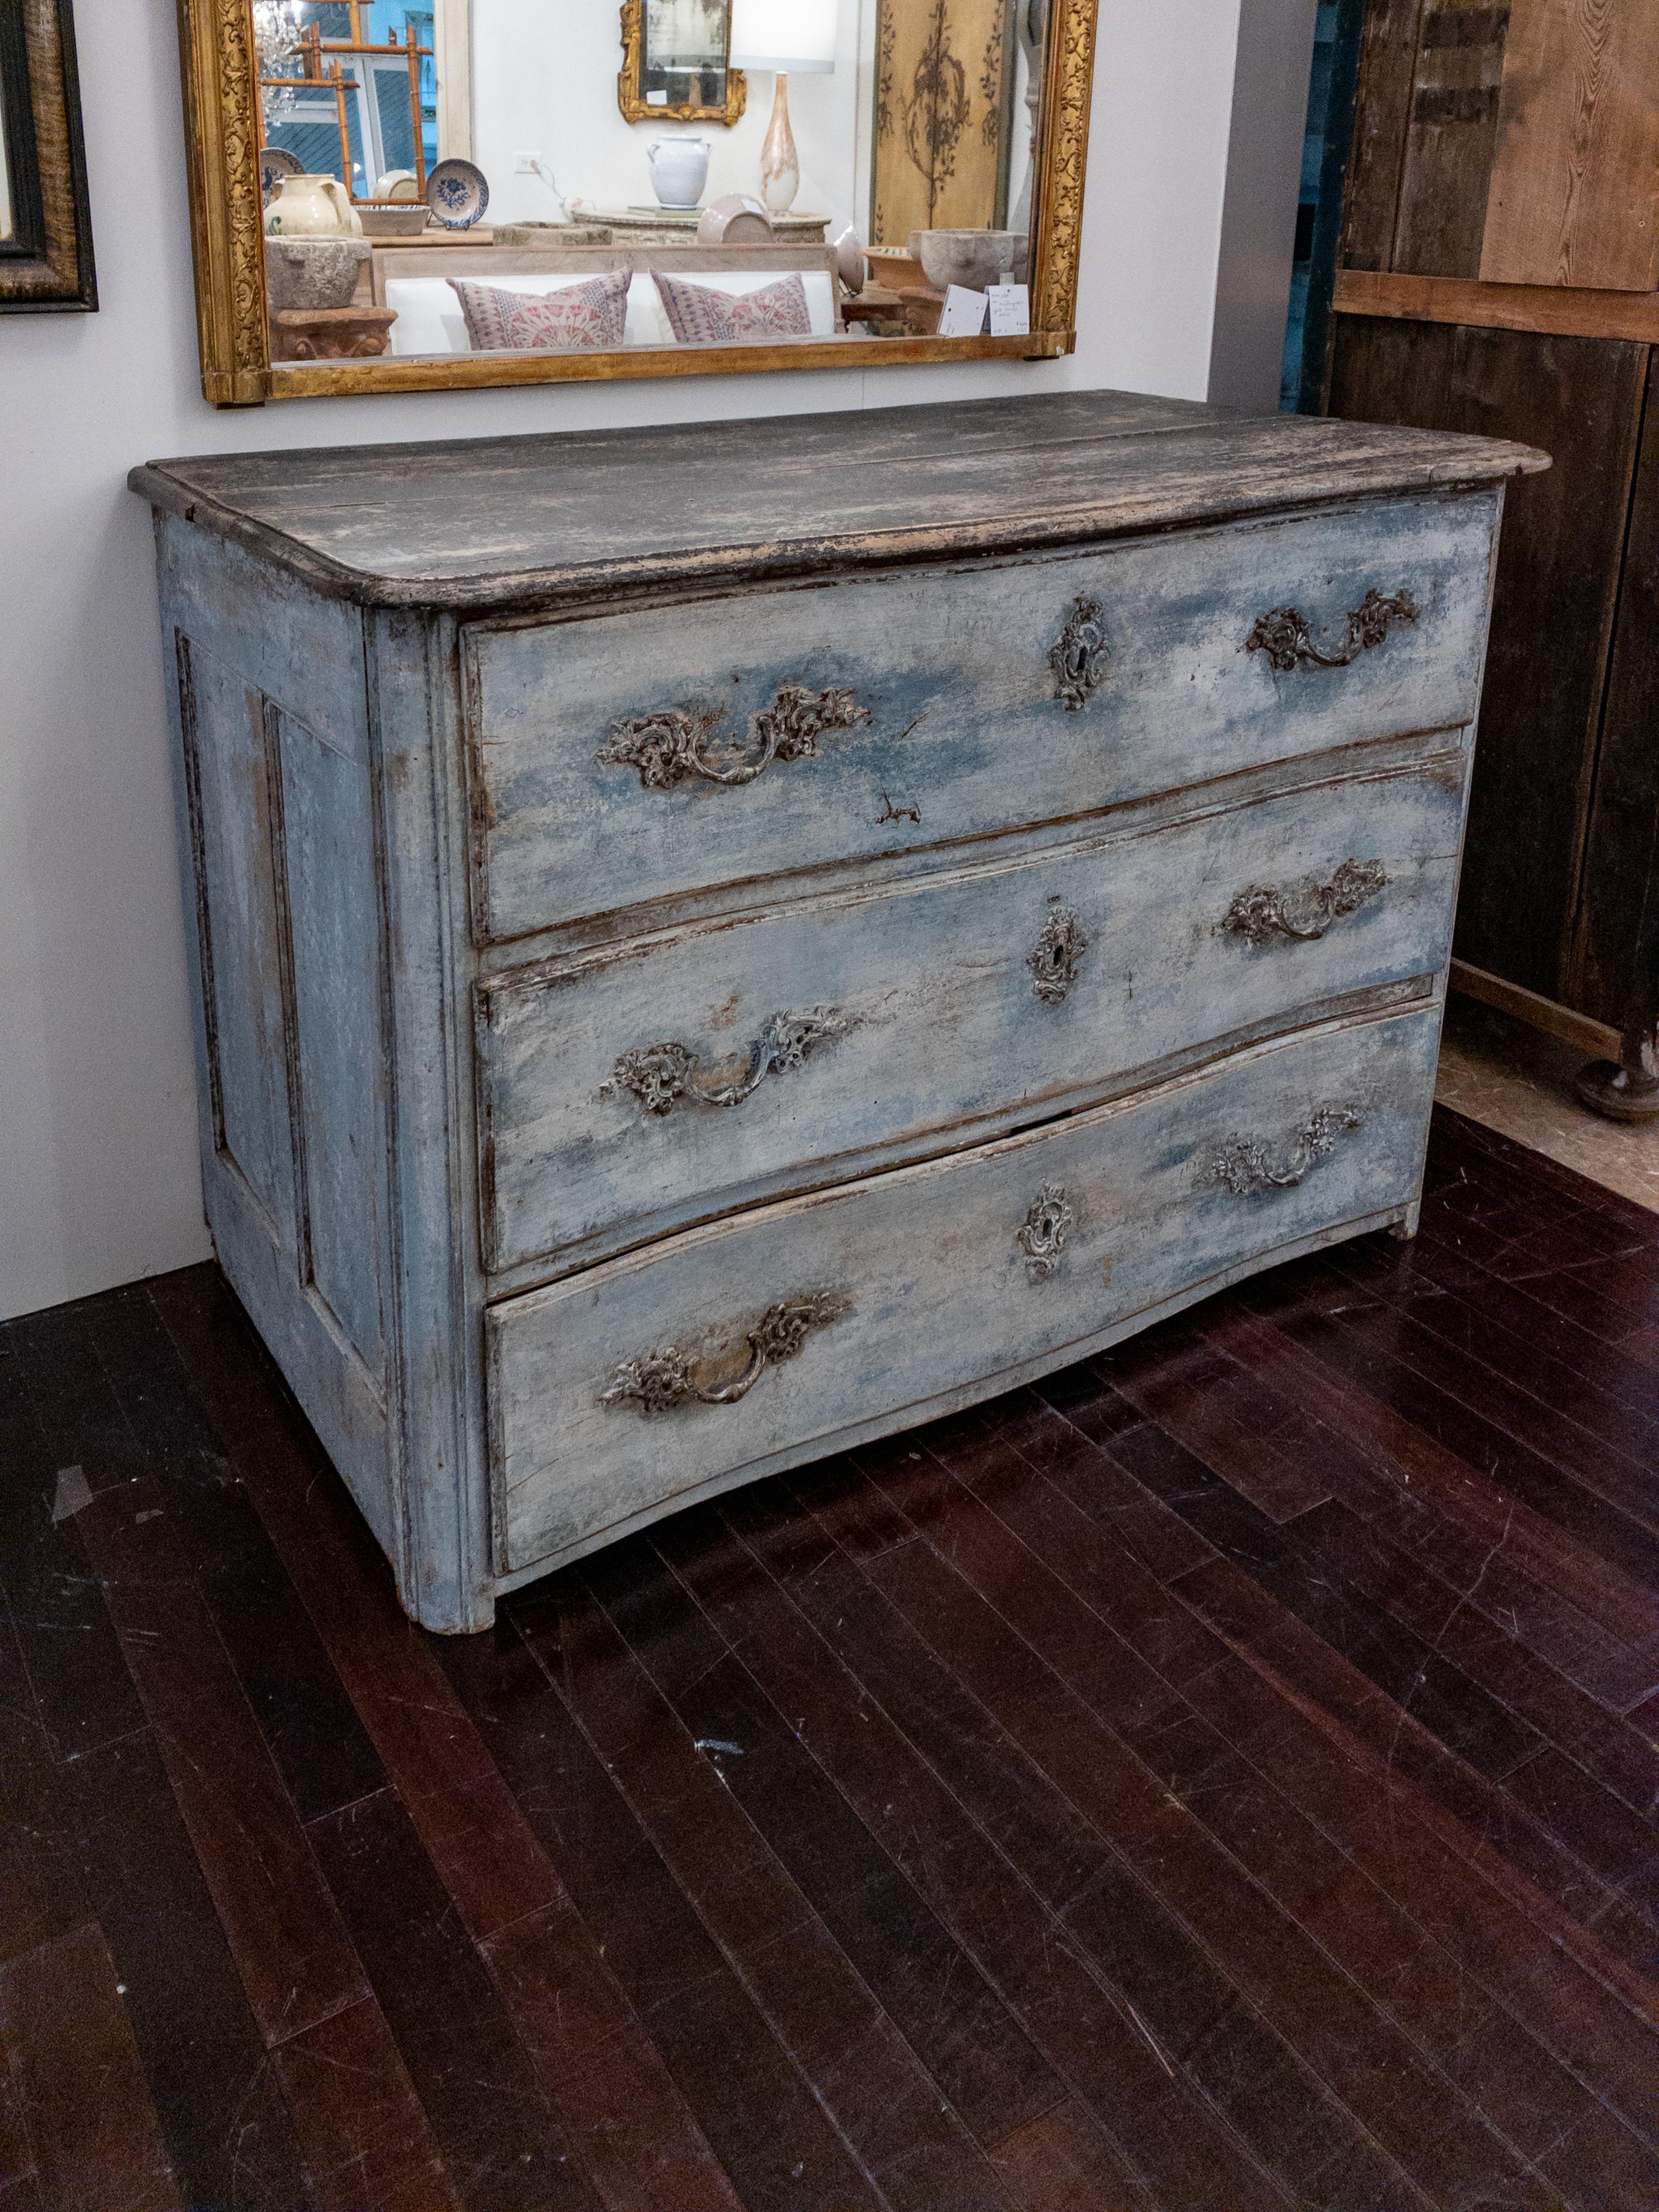 The 18th century French commode is a stunning example of furniture from that era. It features three drawers, providing ample storage space for your belongings. The original hardware, such as handles and escutcheons, adds a touch of authenticity and